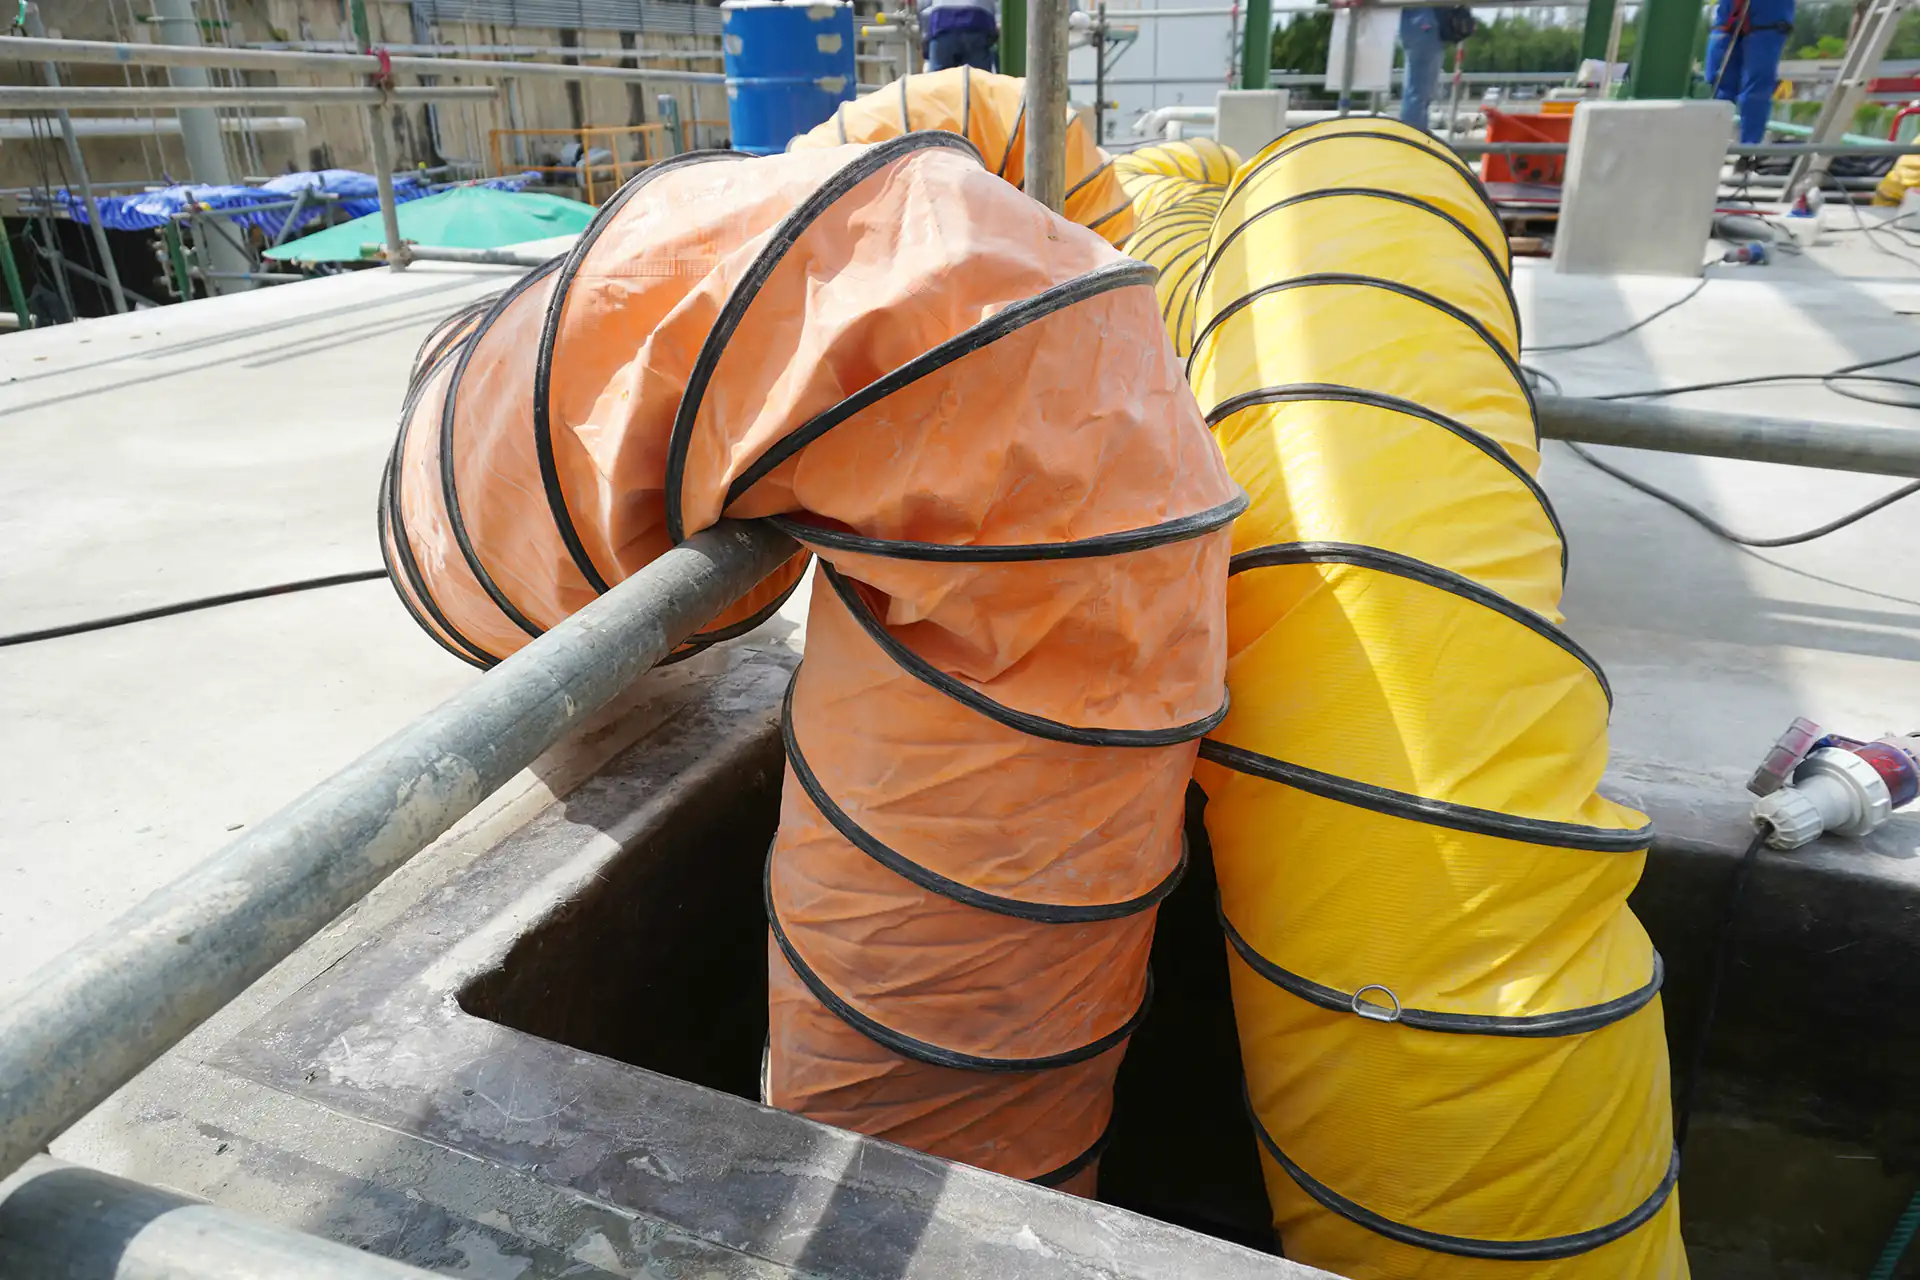 ducting in a working site coming out of a confined space